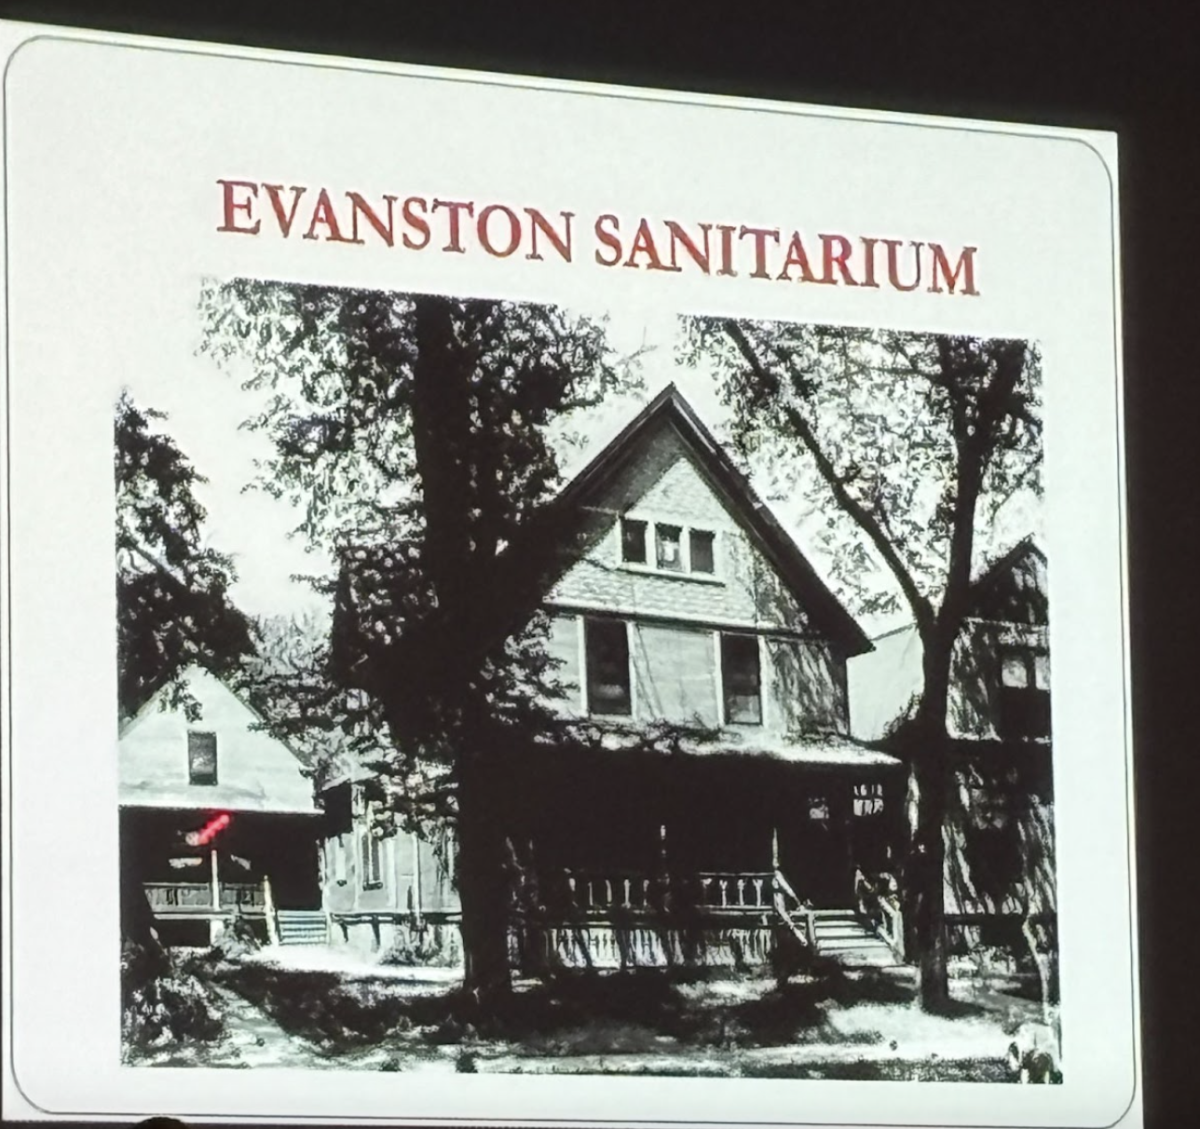 The+Evanston+Sanitarium%2C+opened+in+1914%2C+was+one+of+the+only+hospitals+in+the+area+to+treat+Black+patients+at+the+time.